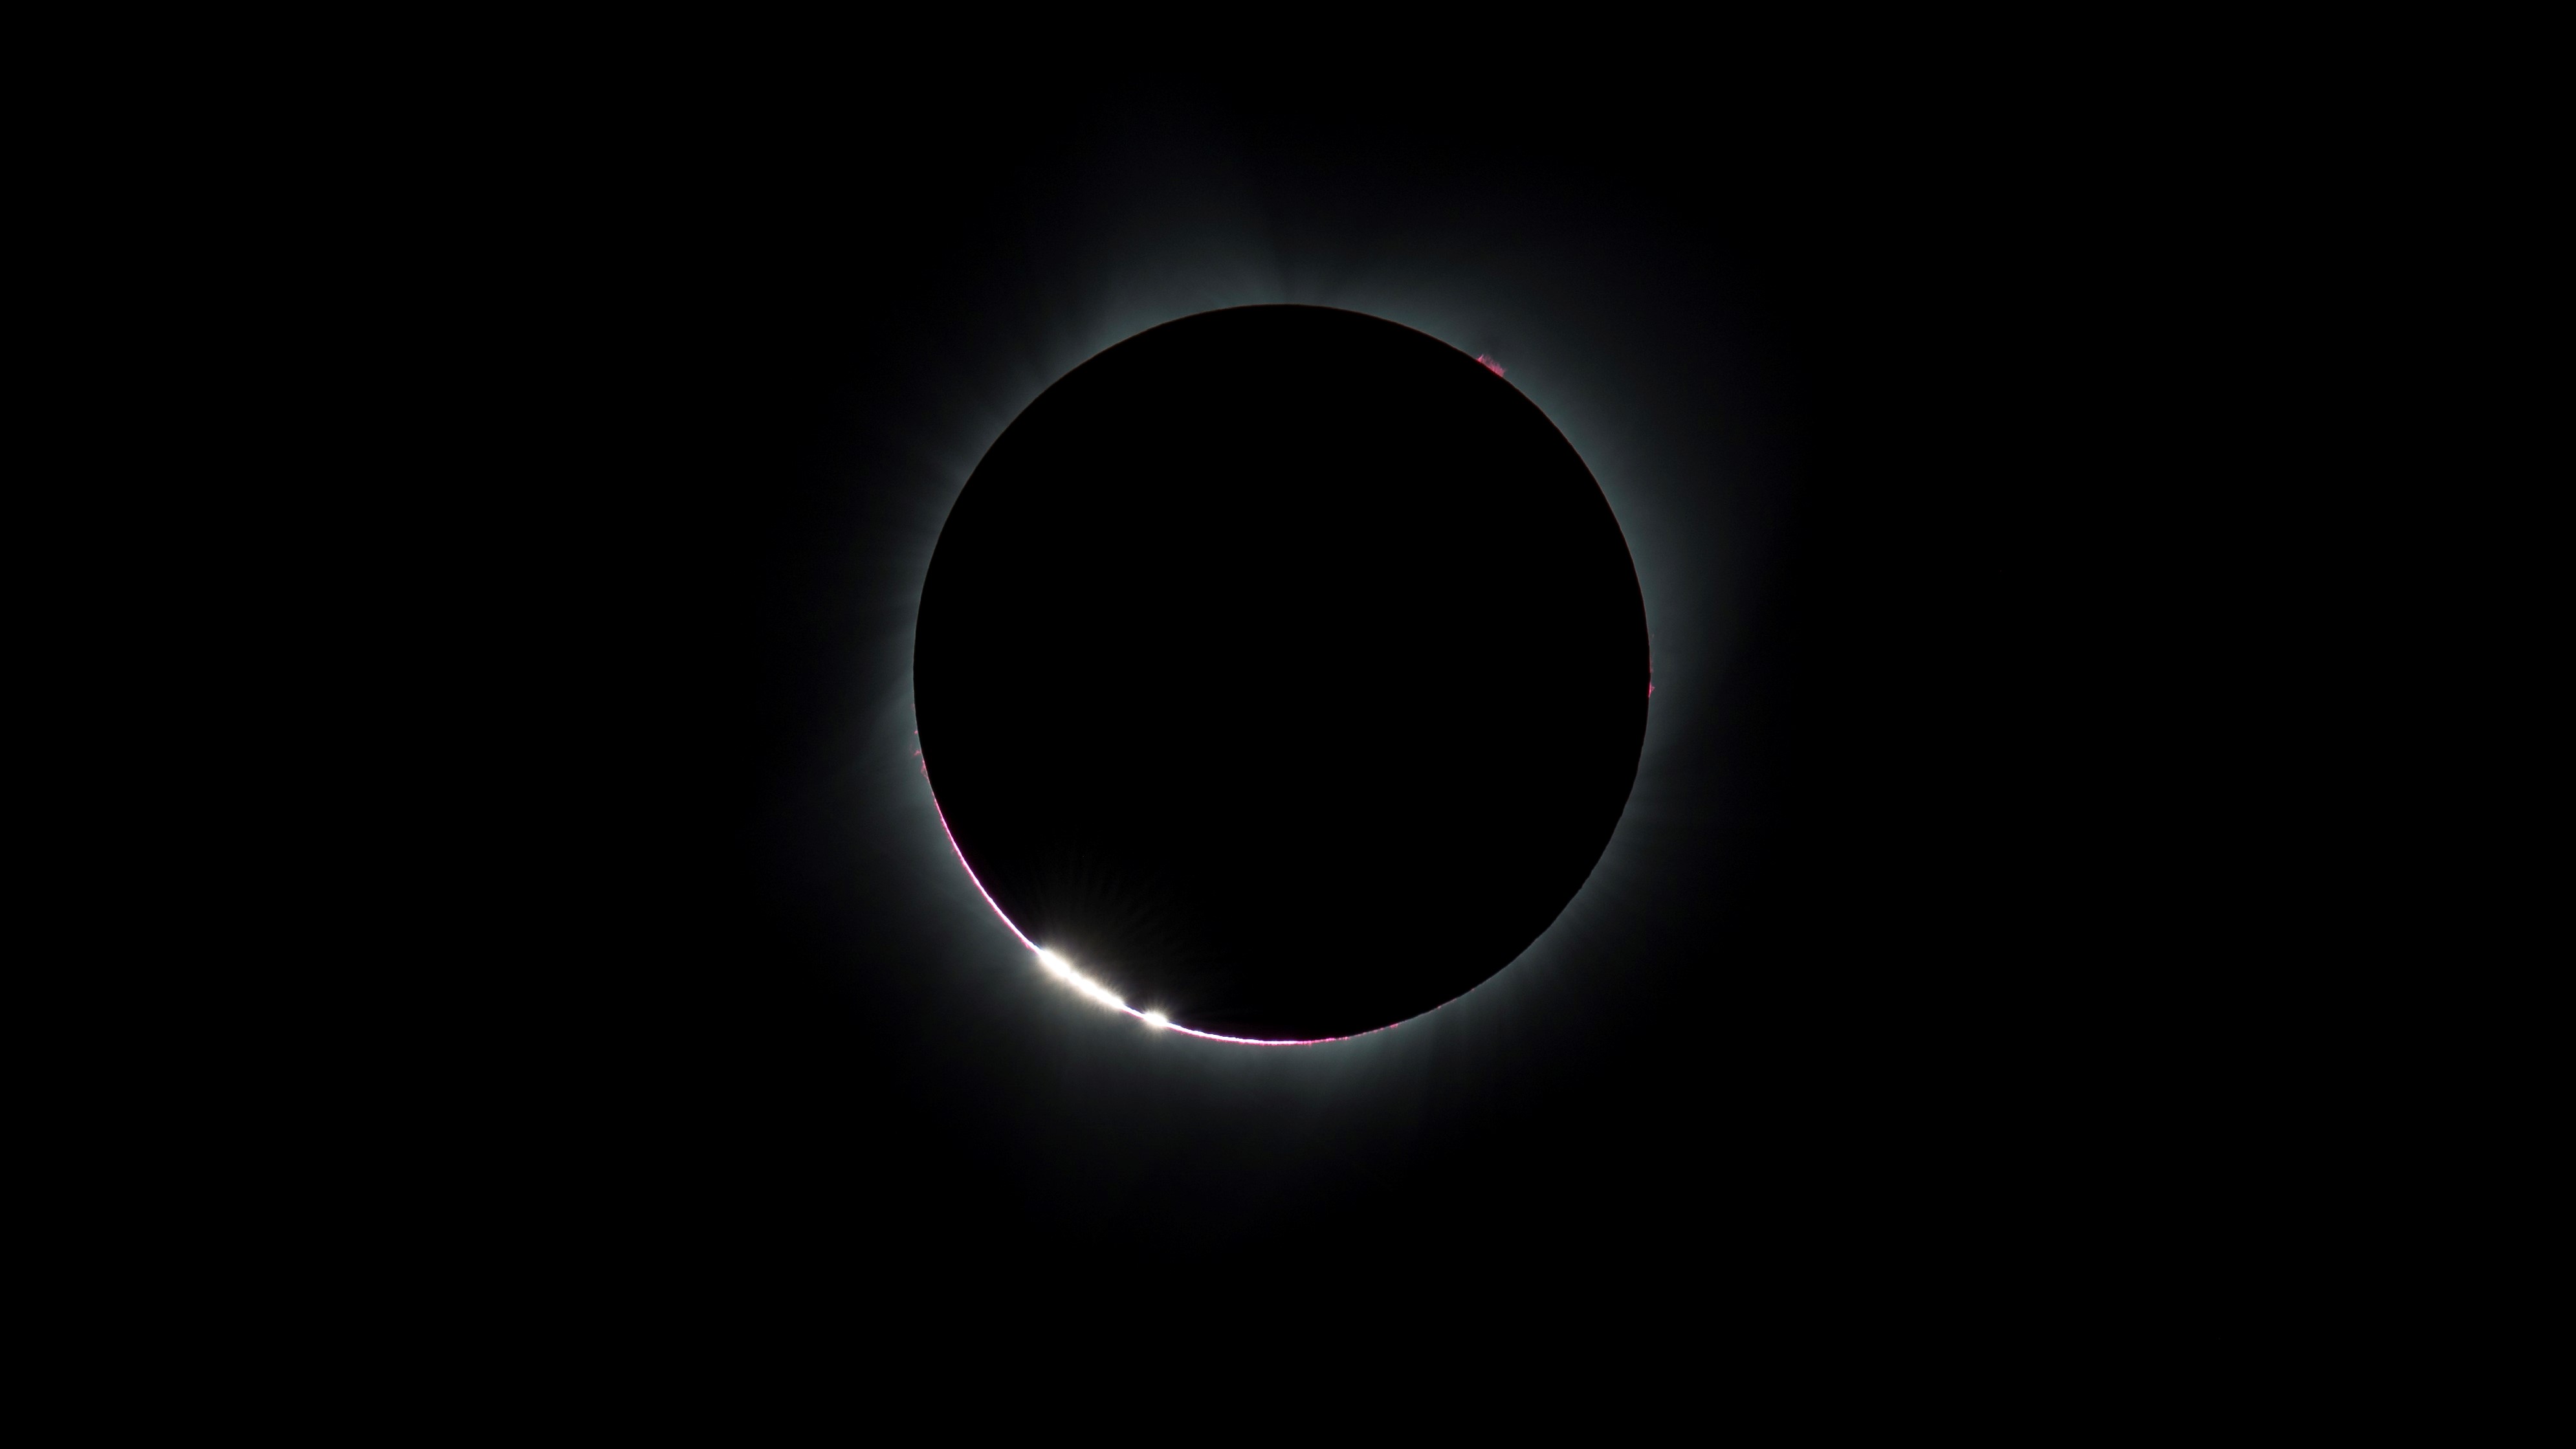 A bright bead of light forms around the edge of the eclipse before totality.